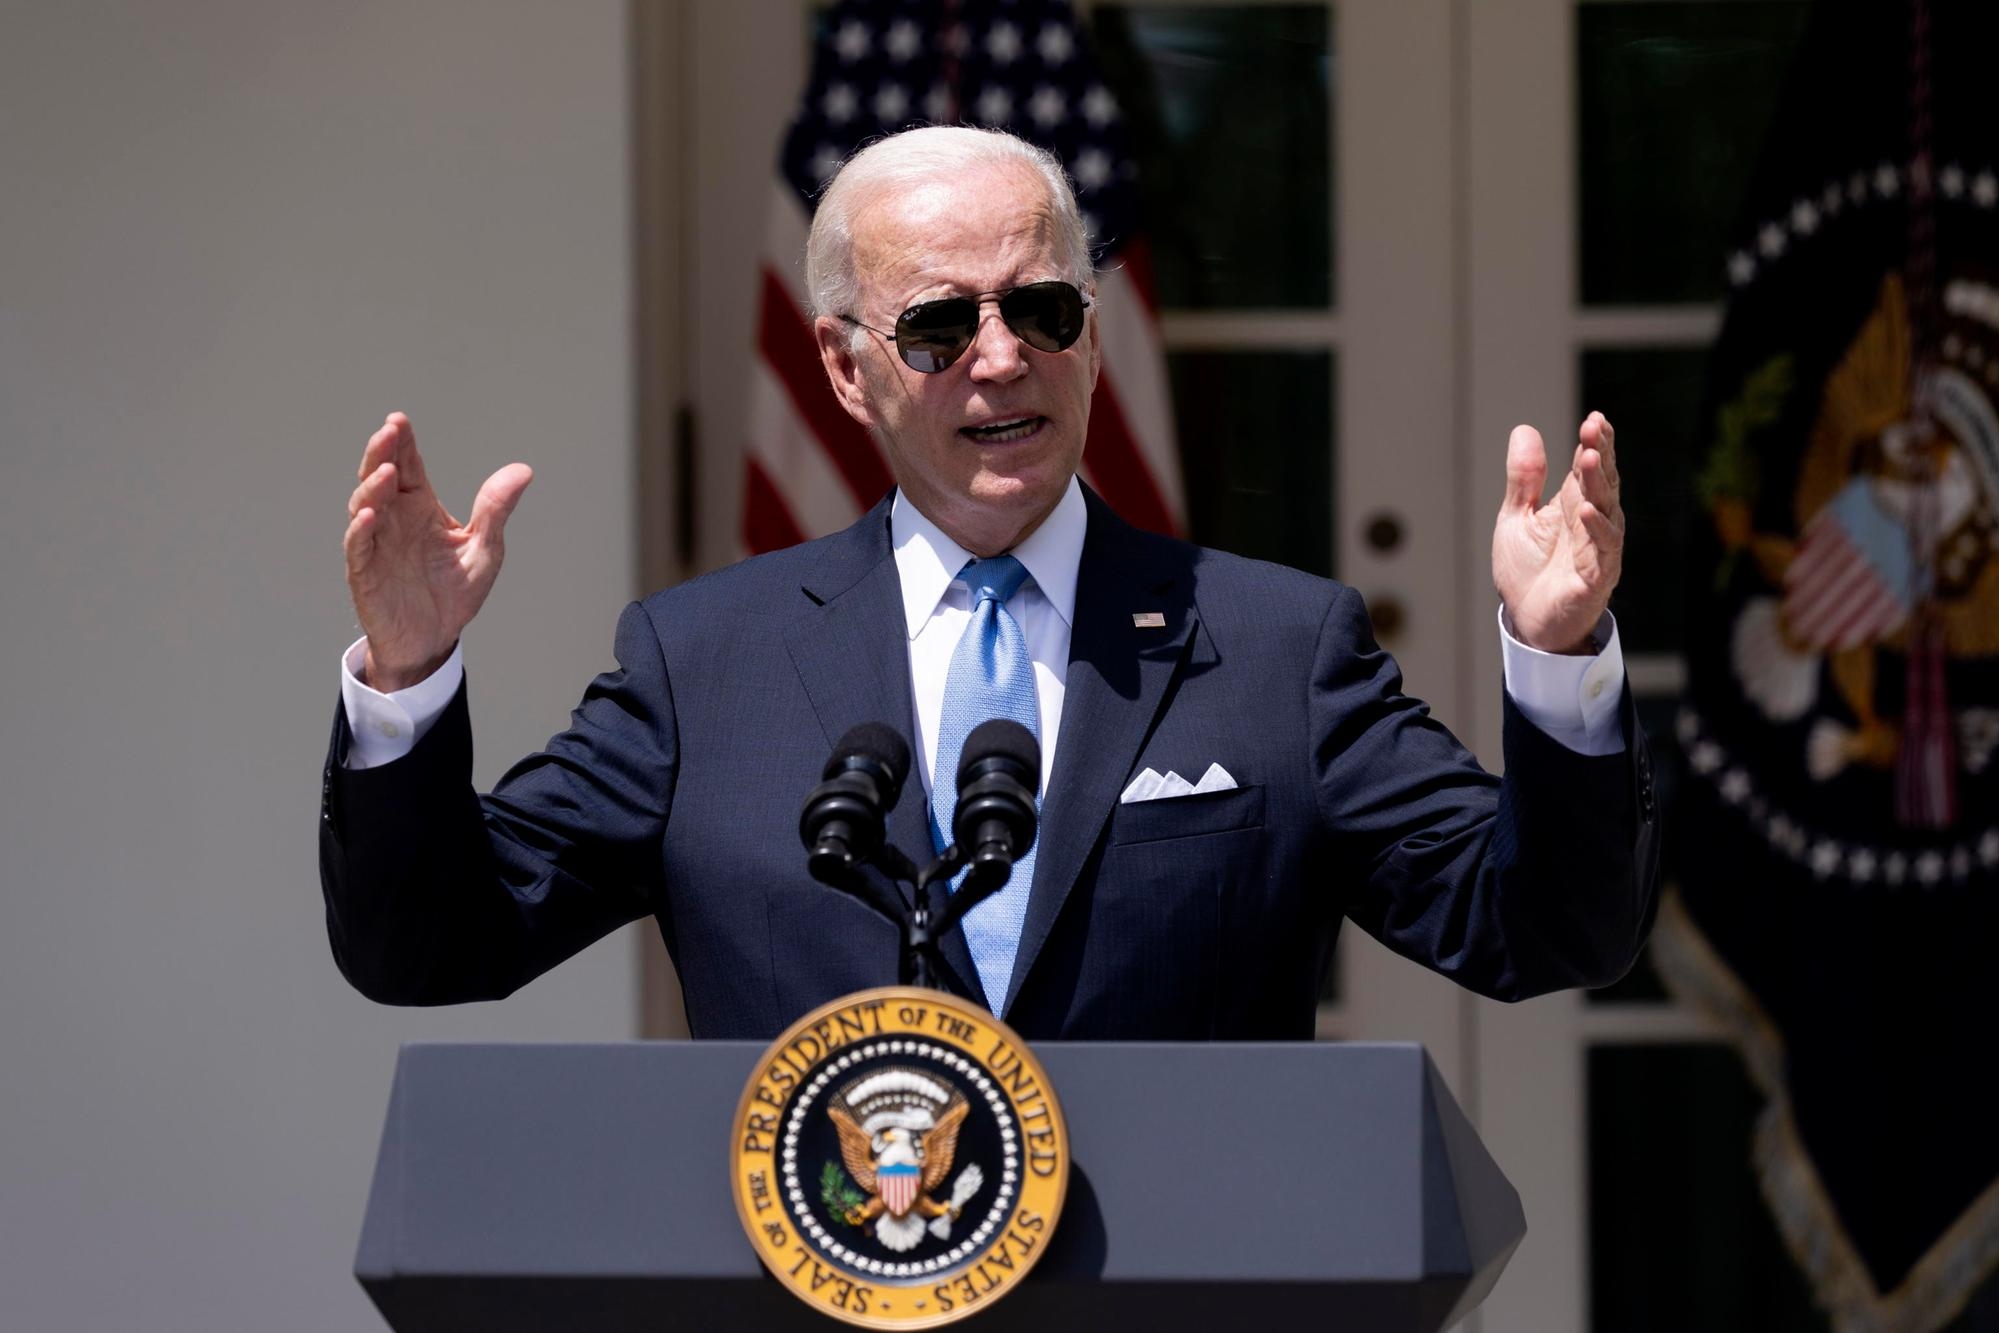 epa10094067 US President Joe Biden delivers remarks in the Rose Garden of the White House during his first public in-person appearance since contracting Covid-19, in Washington, DC, USA, 27 July 2022. Biden tested negative for Covid-19 on 27 July. EPA/MICHAEL REYNOLDS